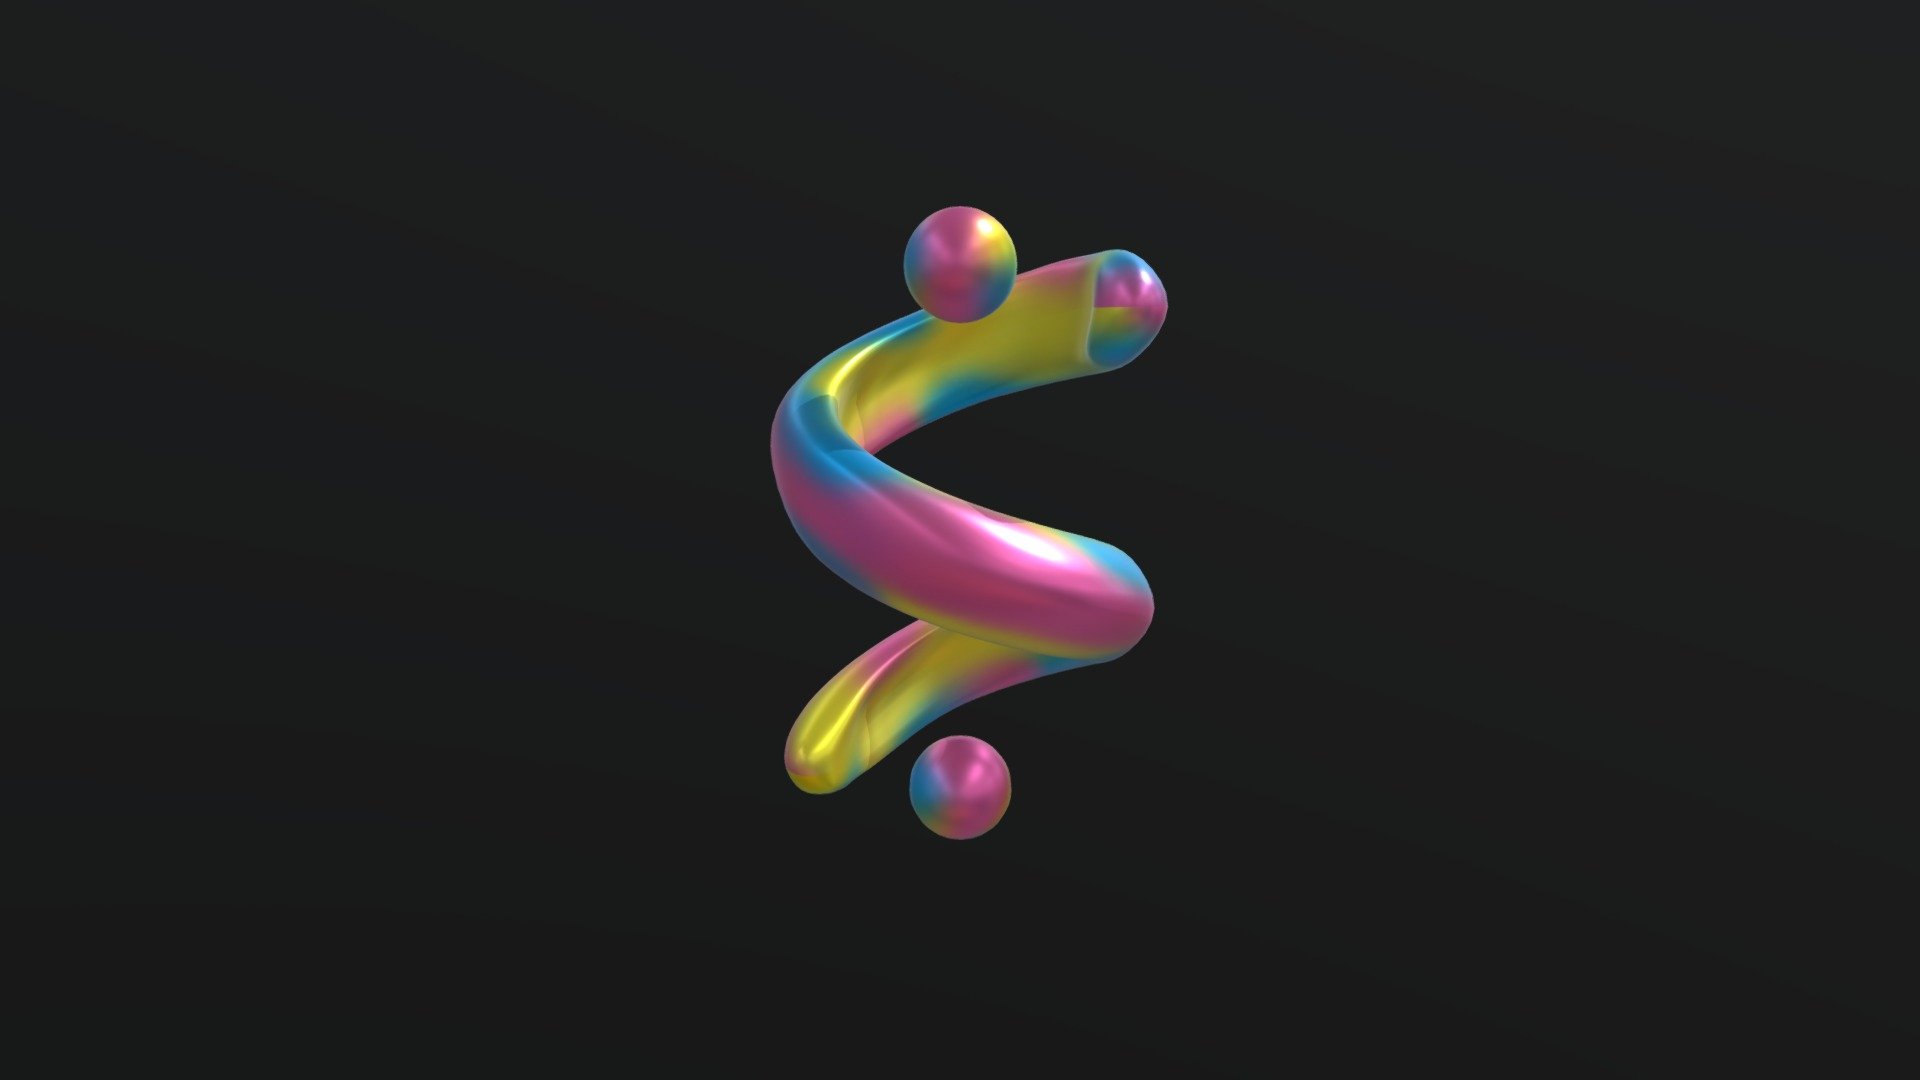 In a triad of colors, they move in sync 3d model